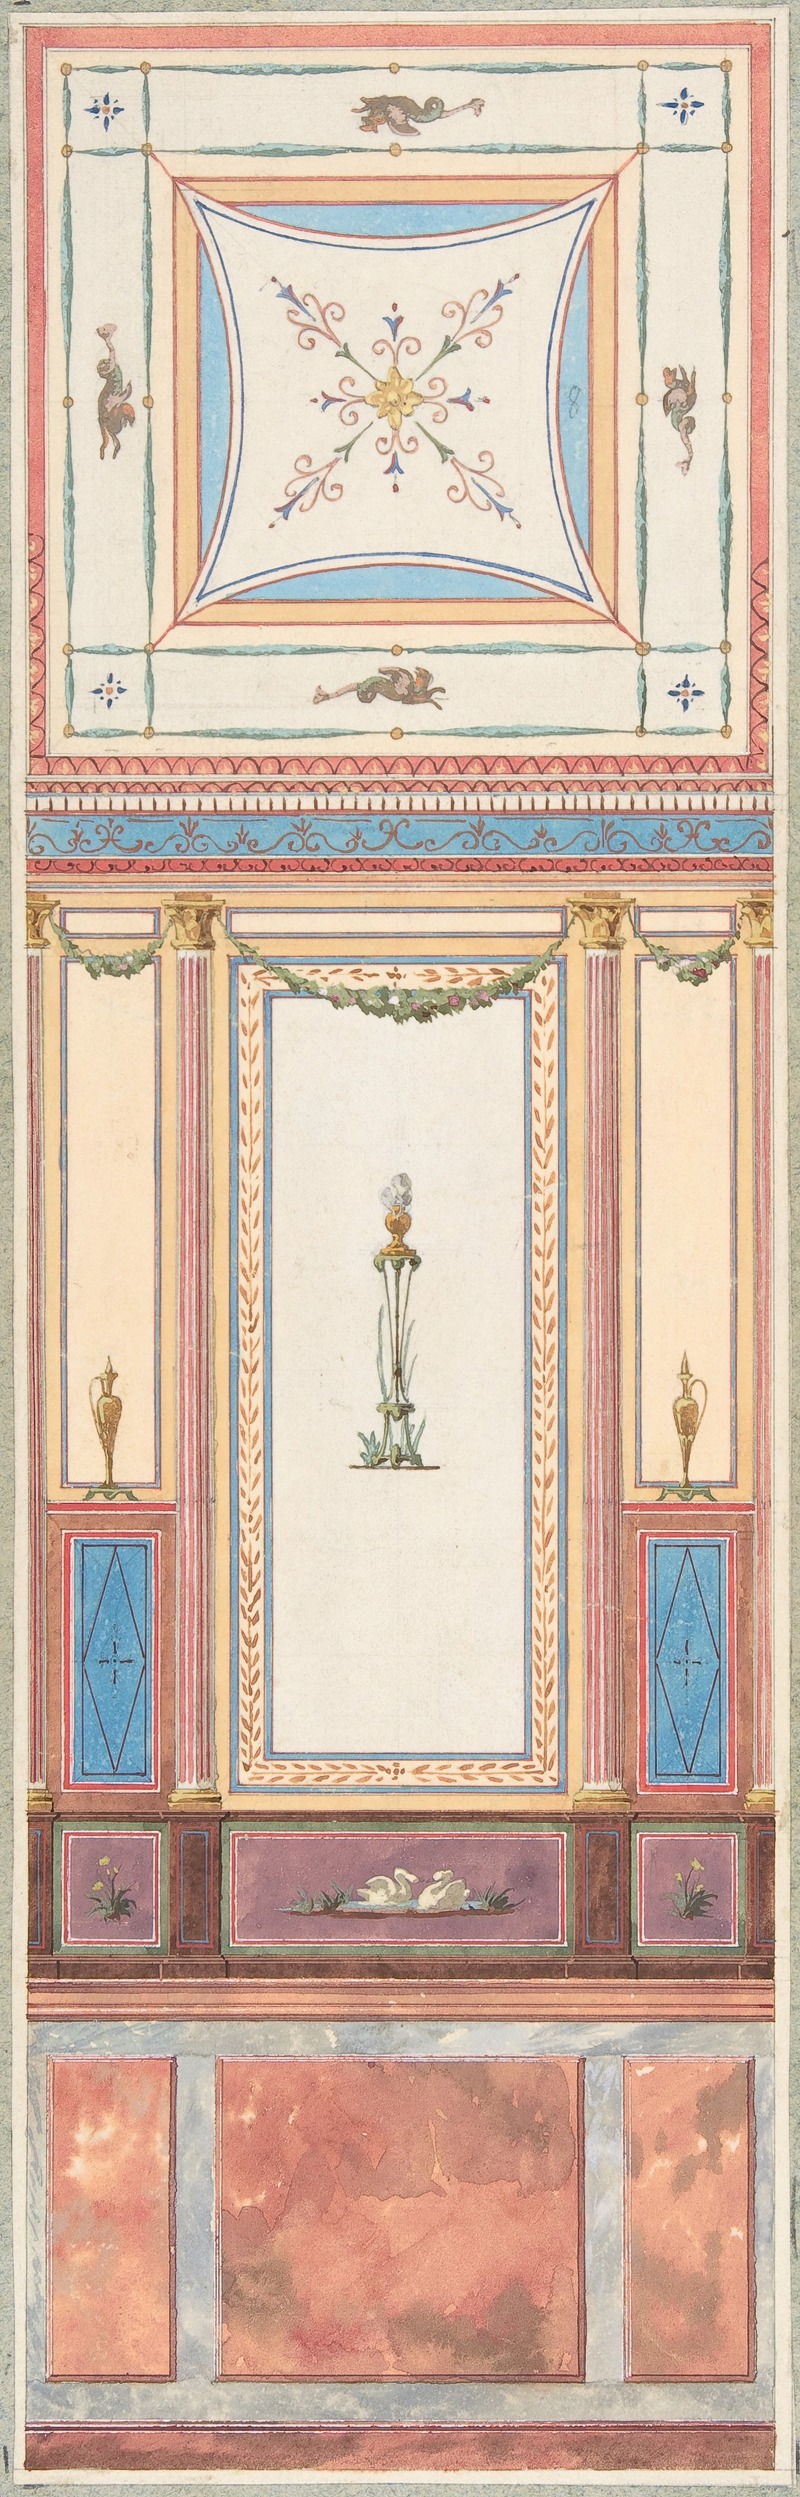 Jules-Edmond-Charles Lachaise - Design for Wall Paneling and Ceiling in Pompeiian Style, The Deepdene, Dorking, Surrey